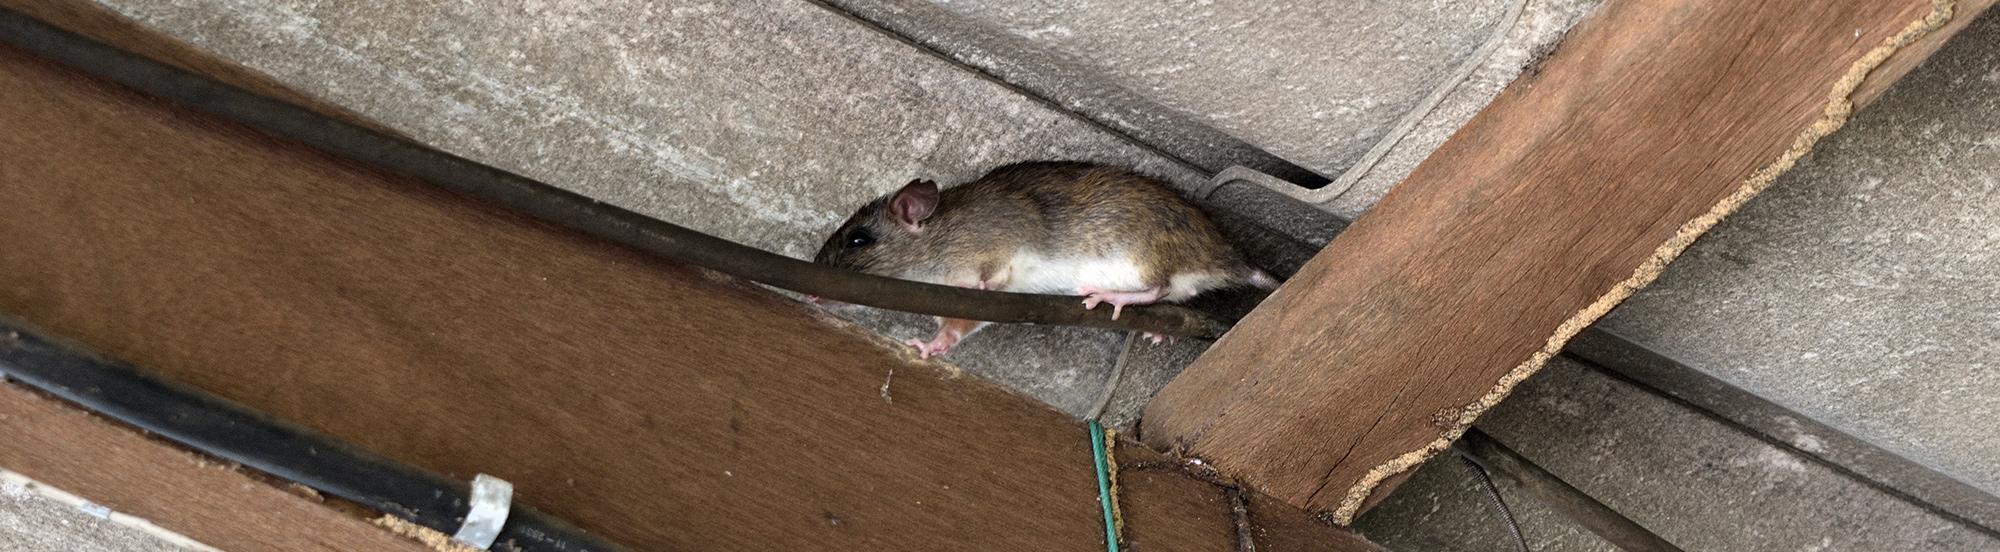 roof rat in rafters